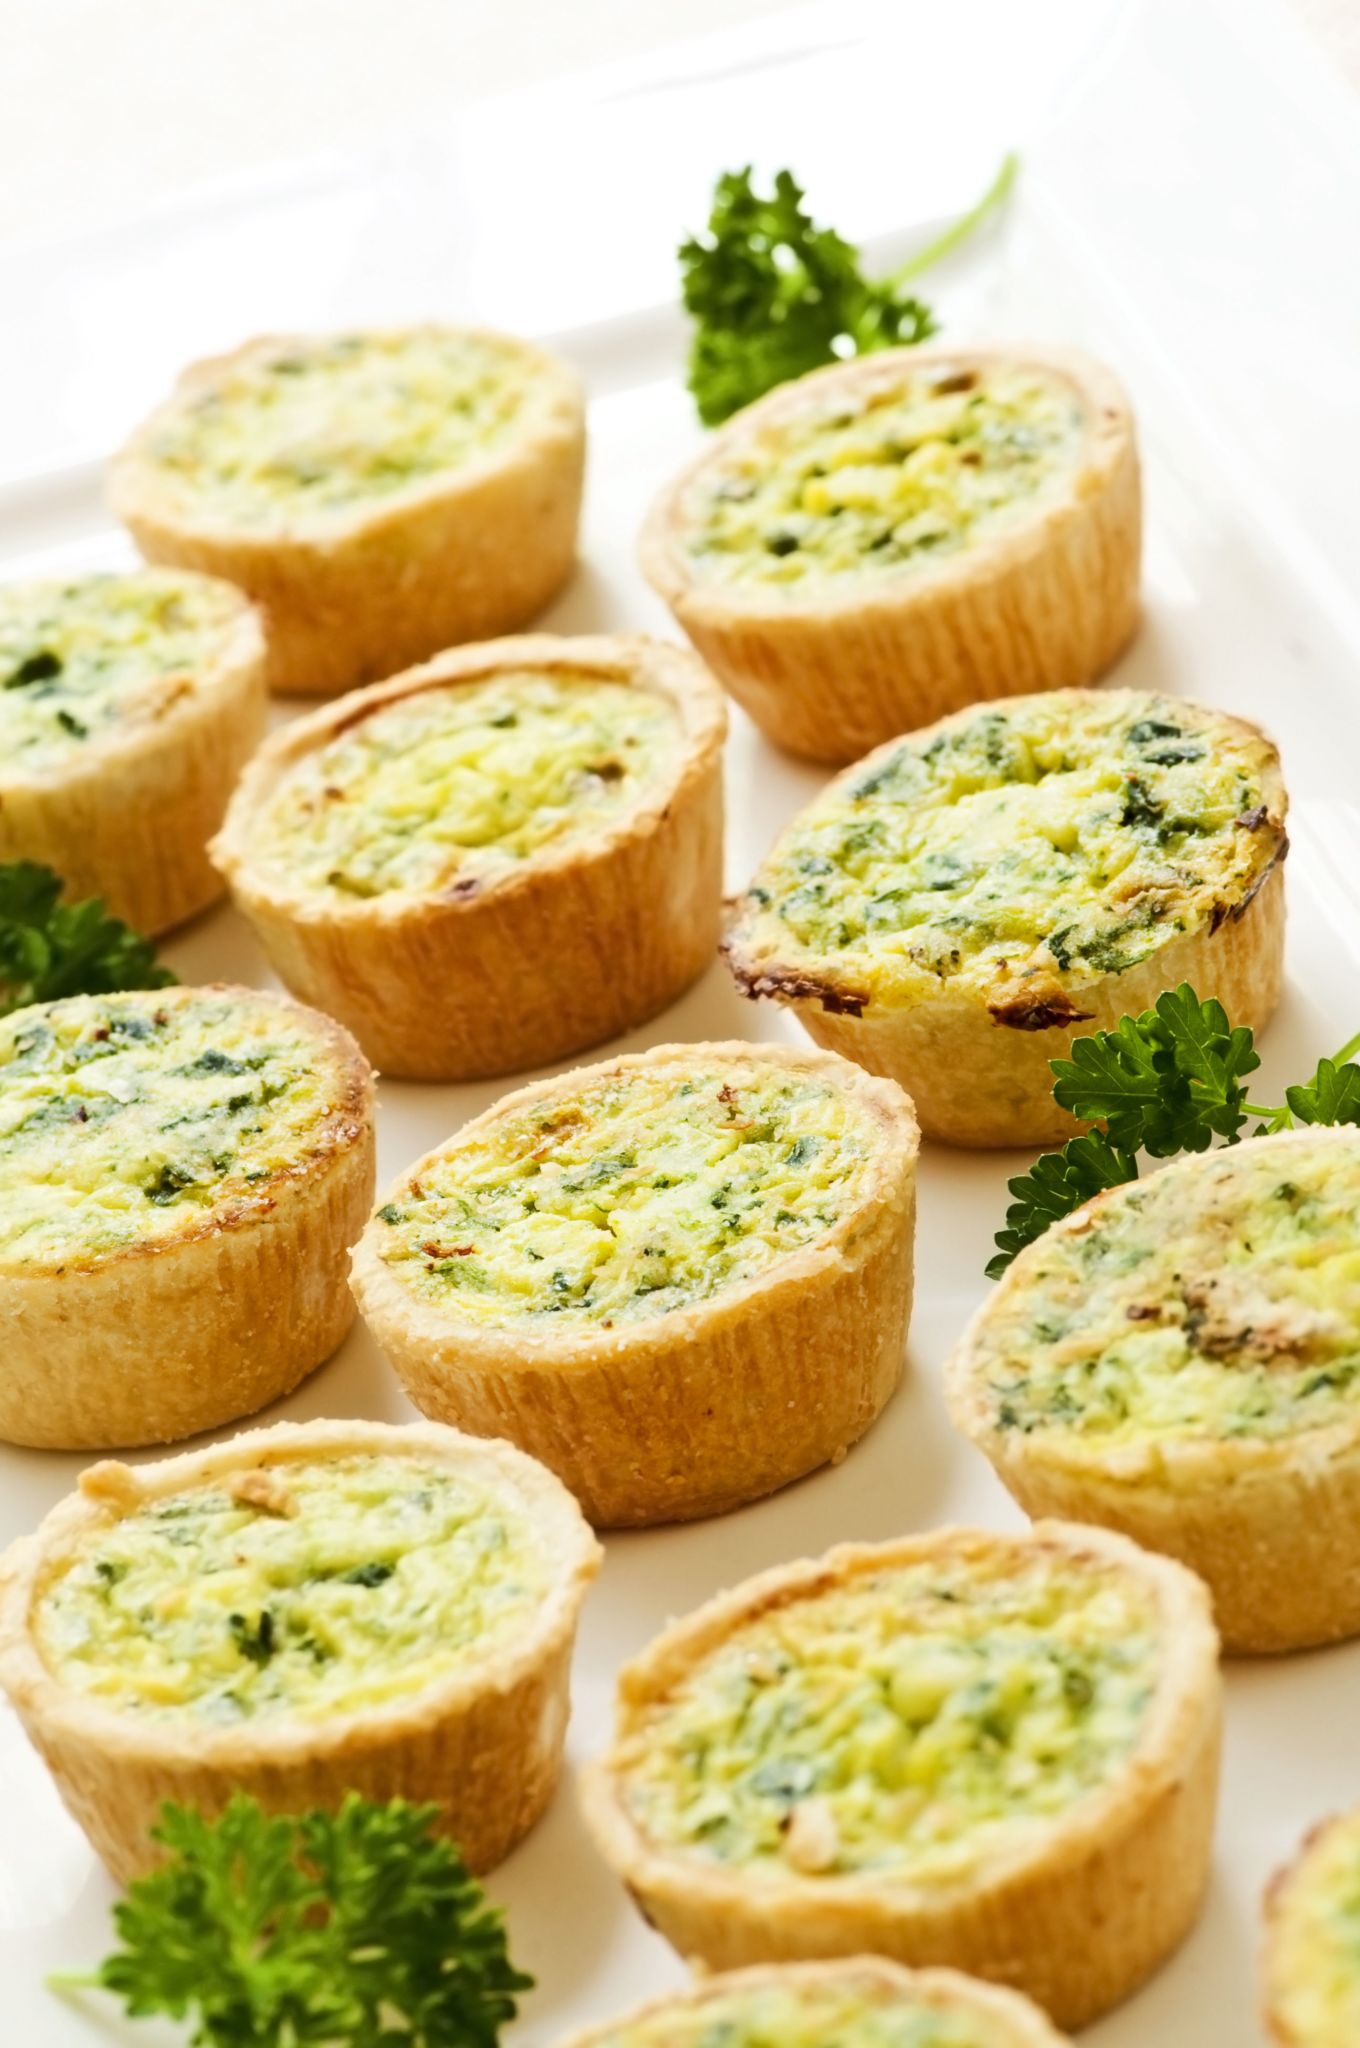 Industrial production of quiches – Unifiller food processing machines